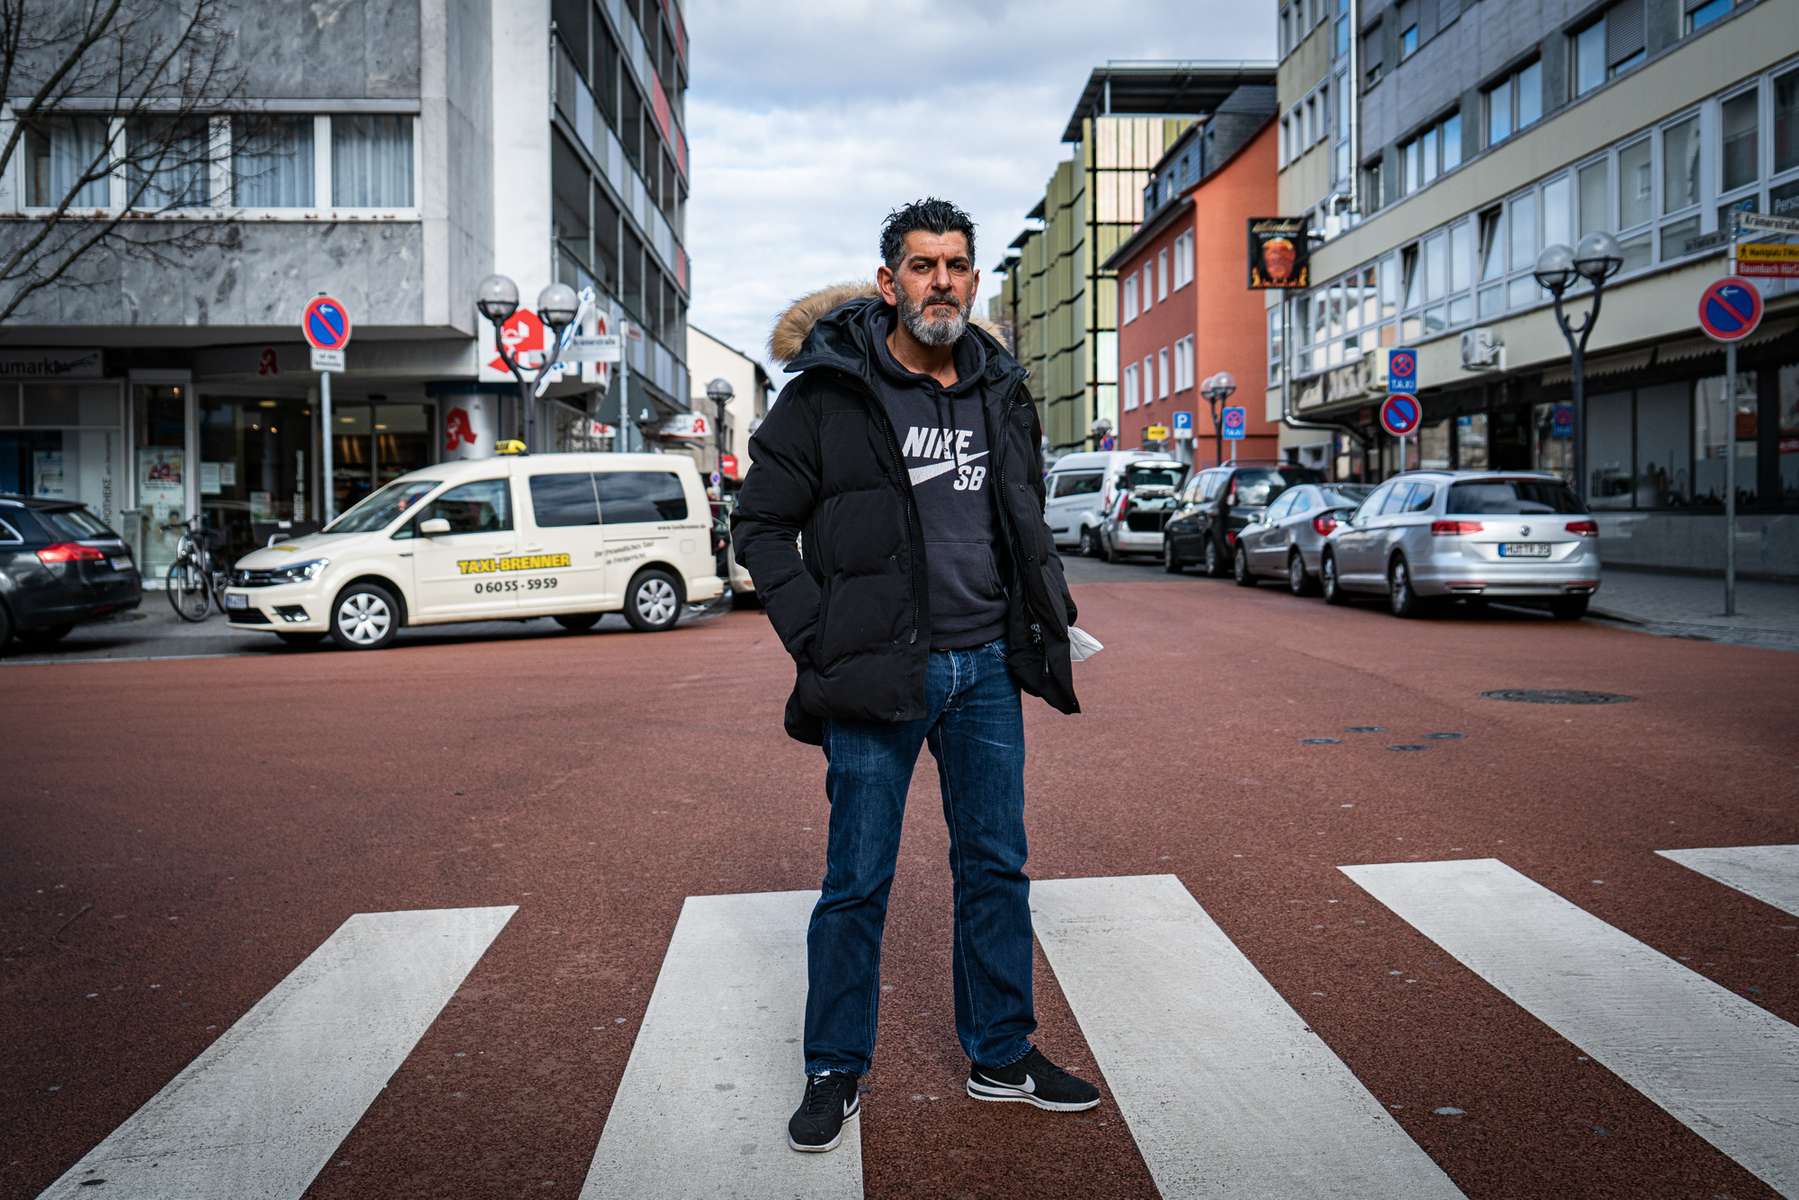 Cetin Gültekin is standing on a street close to a bar in the city of Hanau where his brother Gökhan und eight others were one year earlier by a right wing extremist.